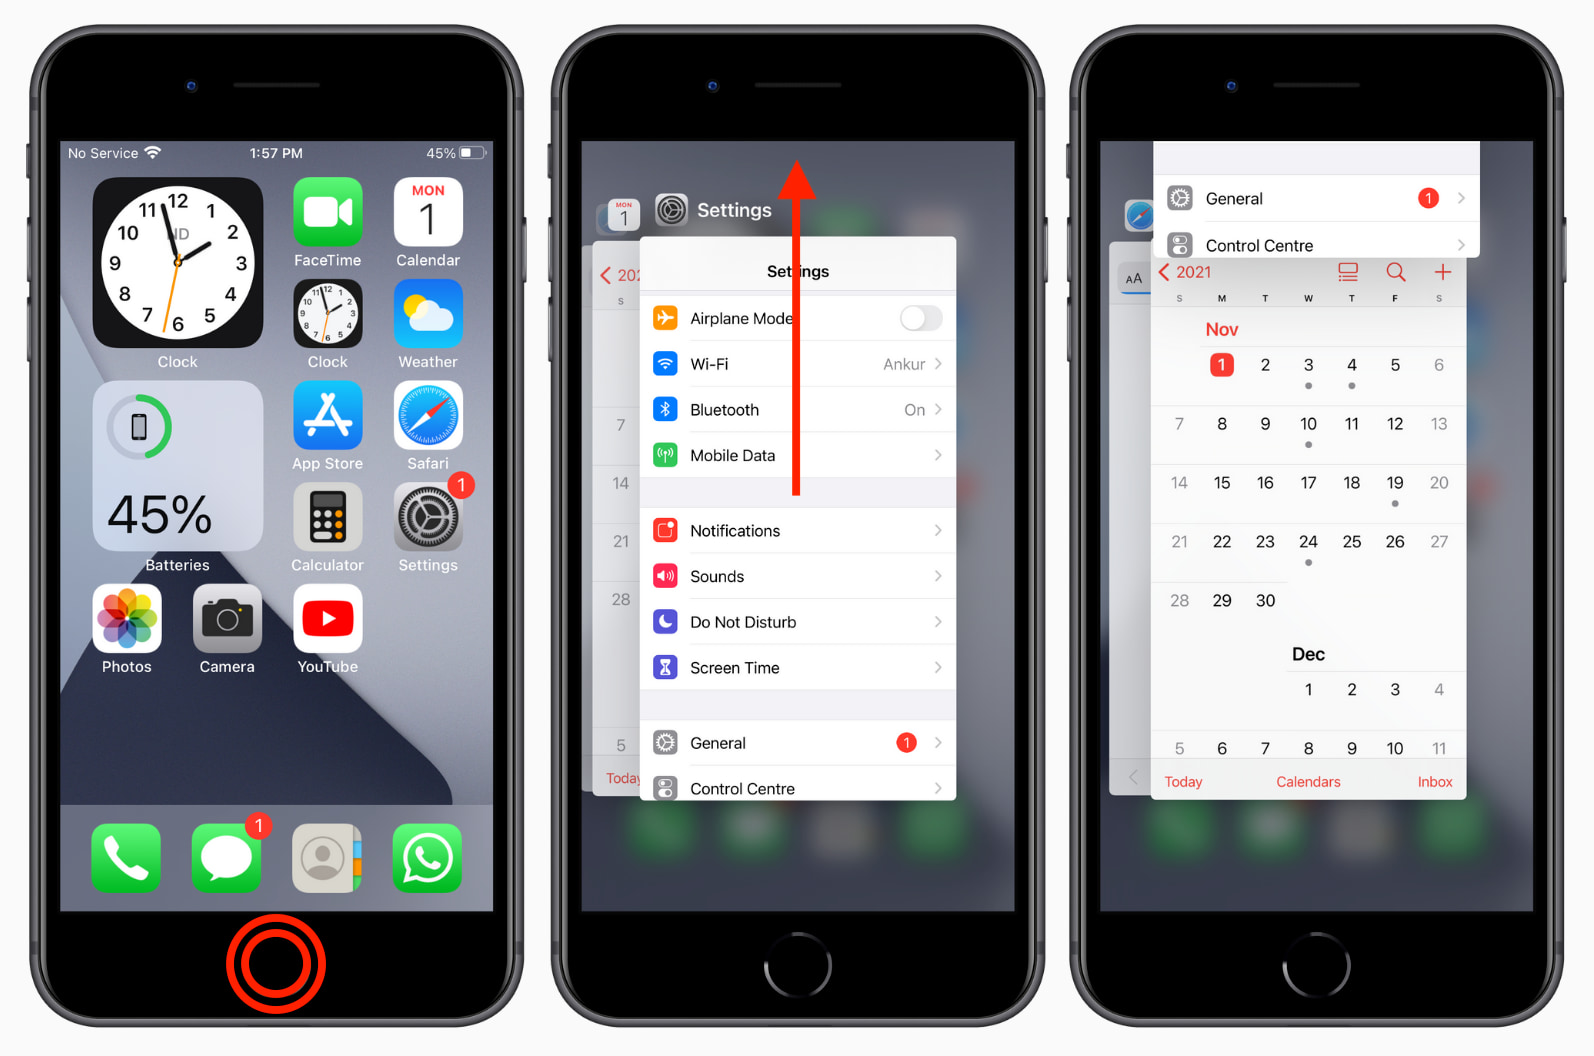 Steps showing how to force quit apps on iPhone with Home button